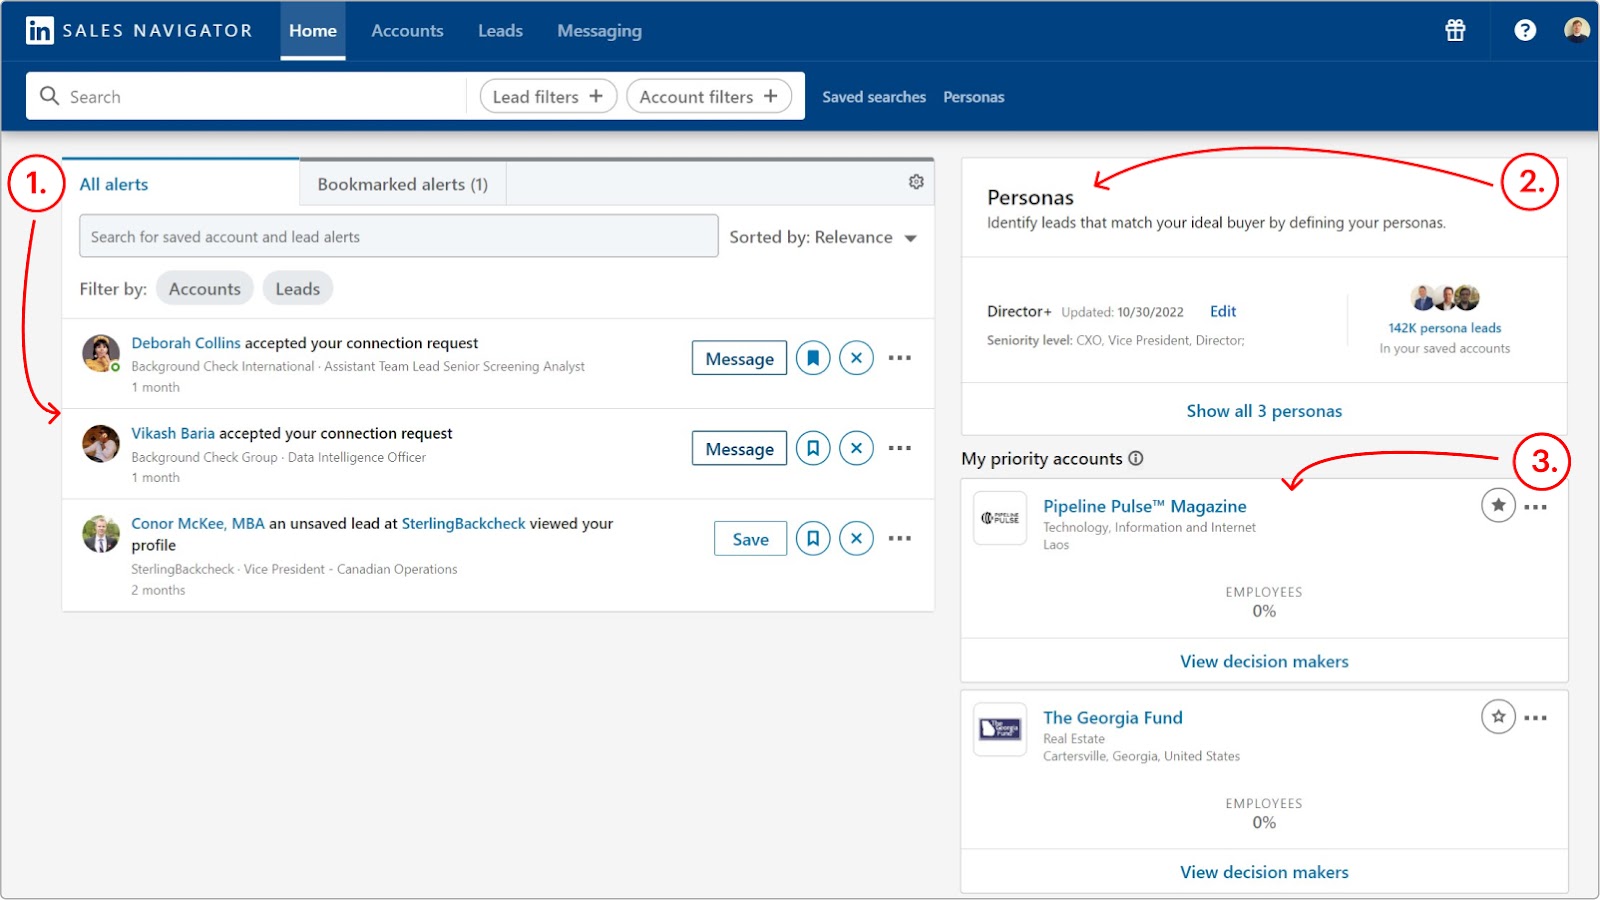 linkedin sales navigator front page with alerts, personas and priority account